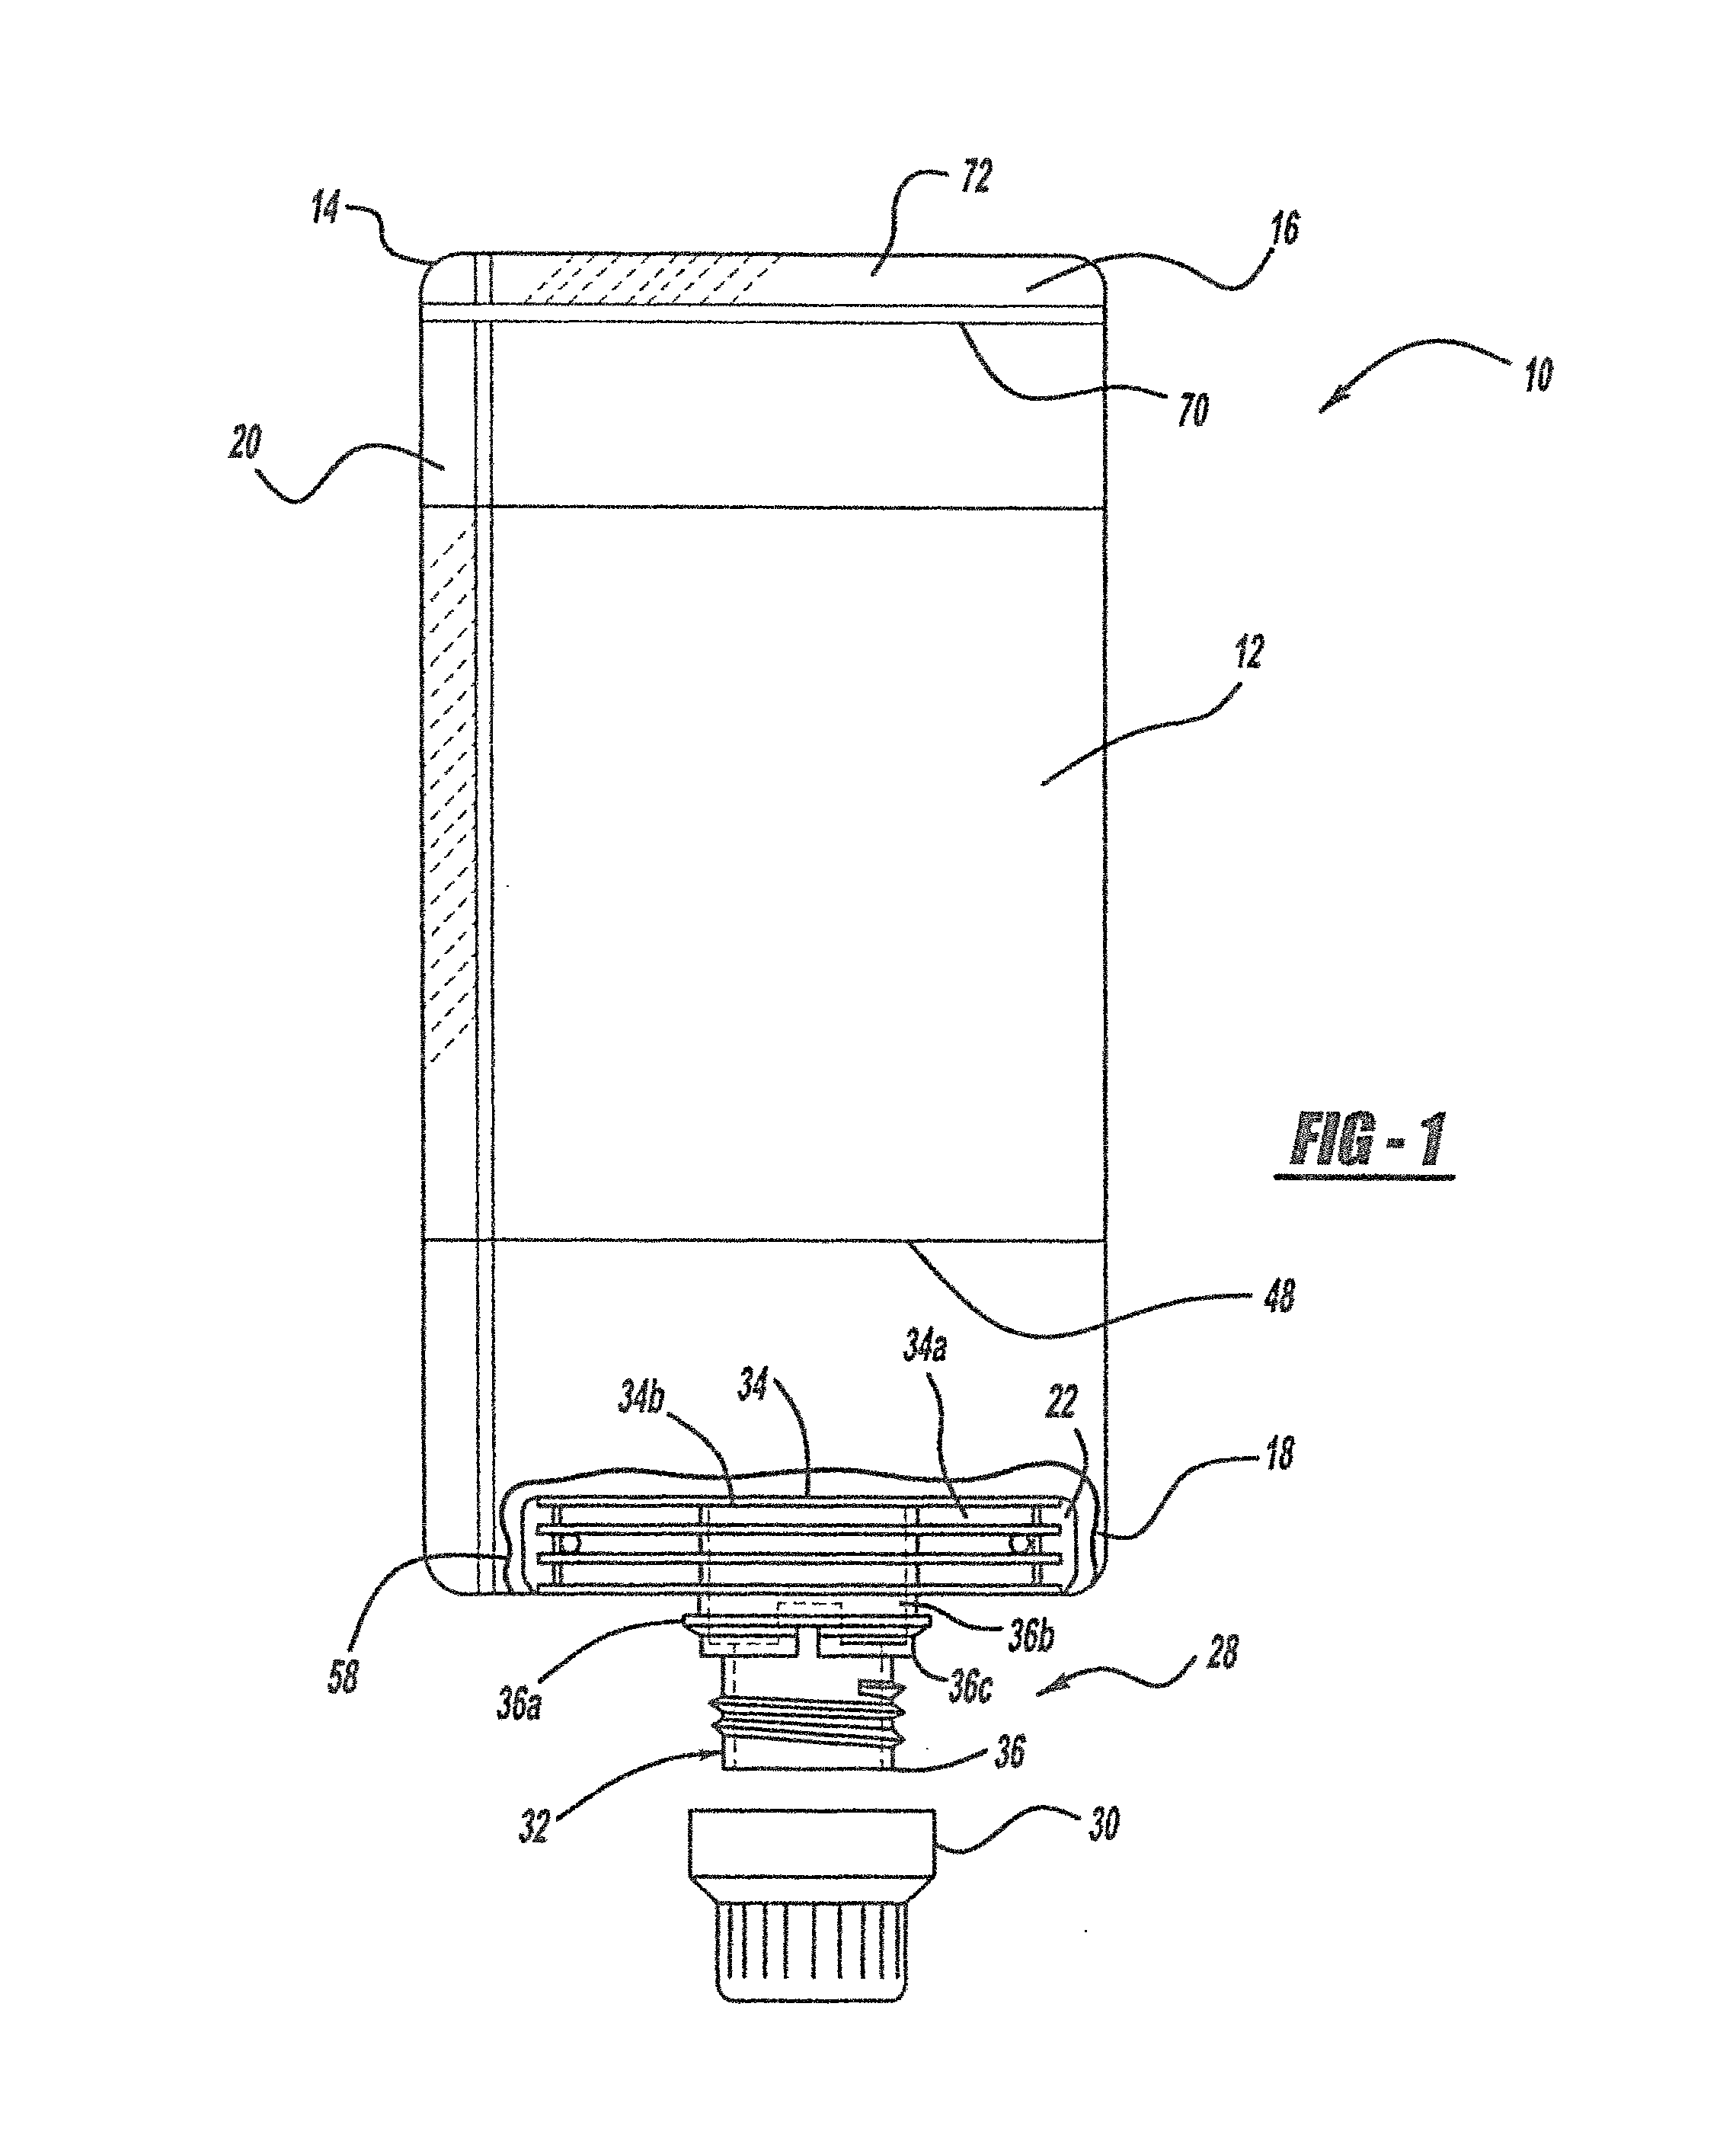 Automated machine and method for mounting a fitment to a flexible pouch